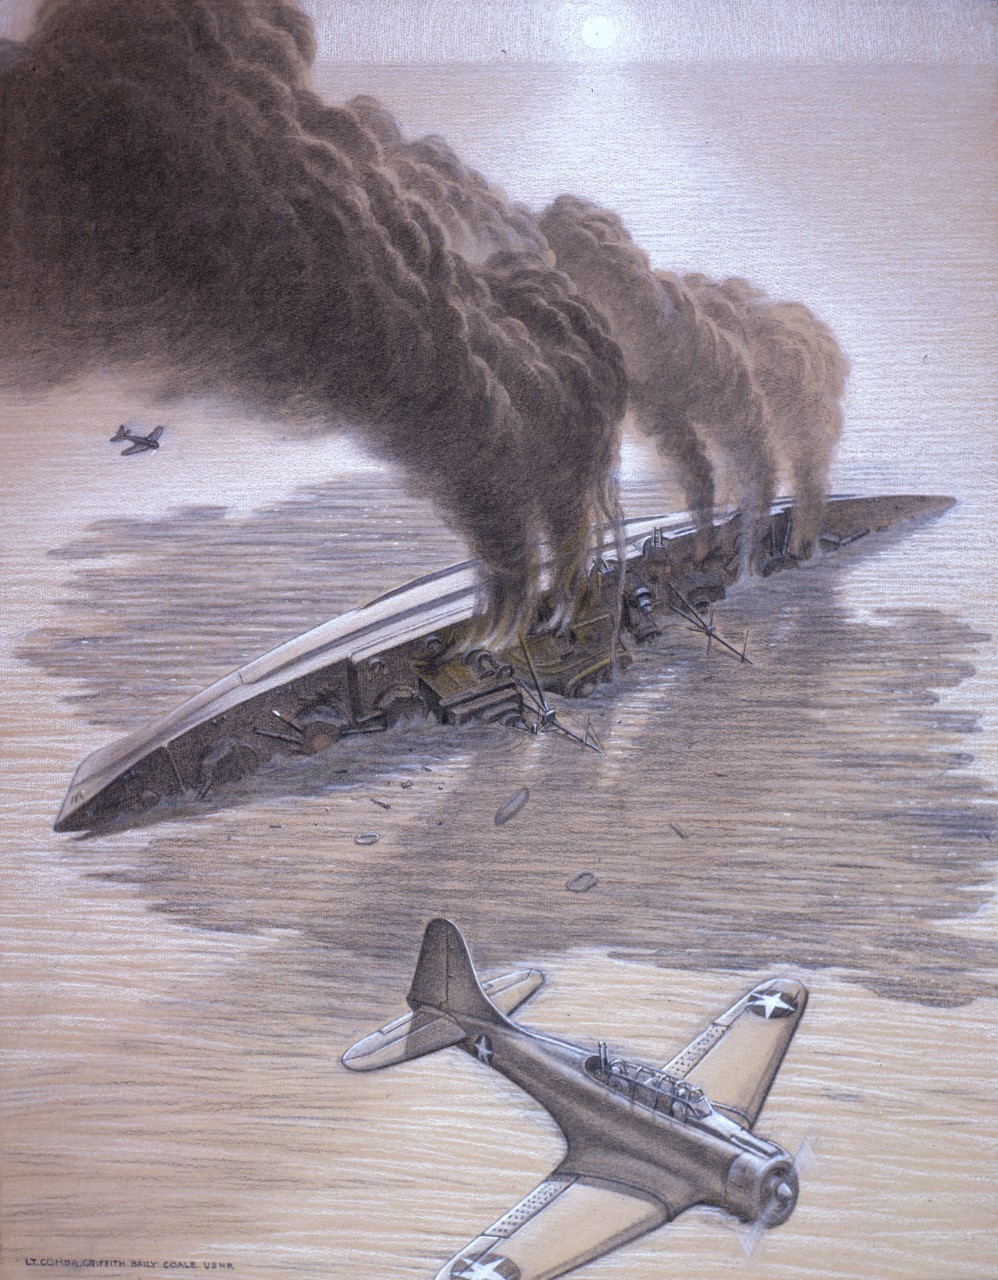 Japanese ship is sinking while American planes fly over